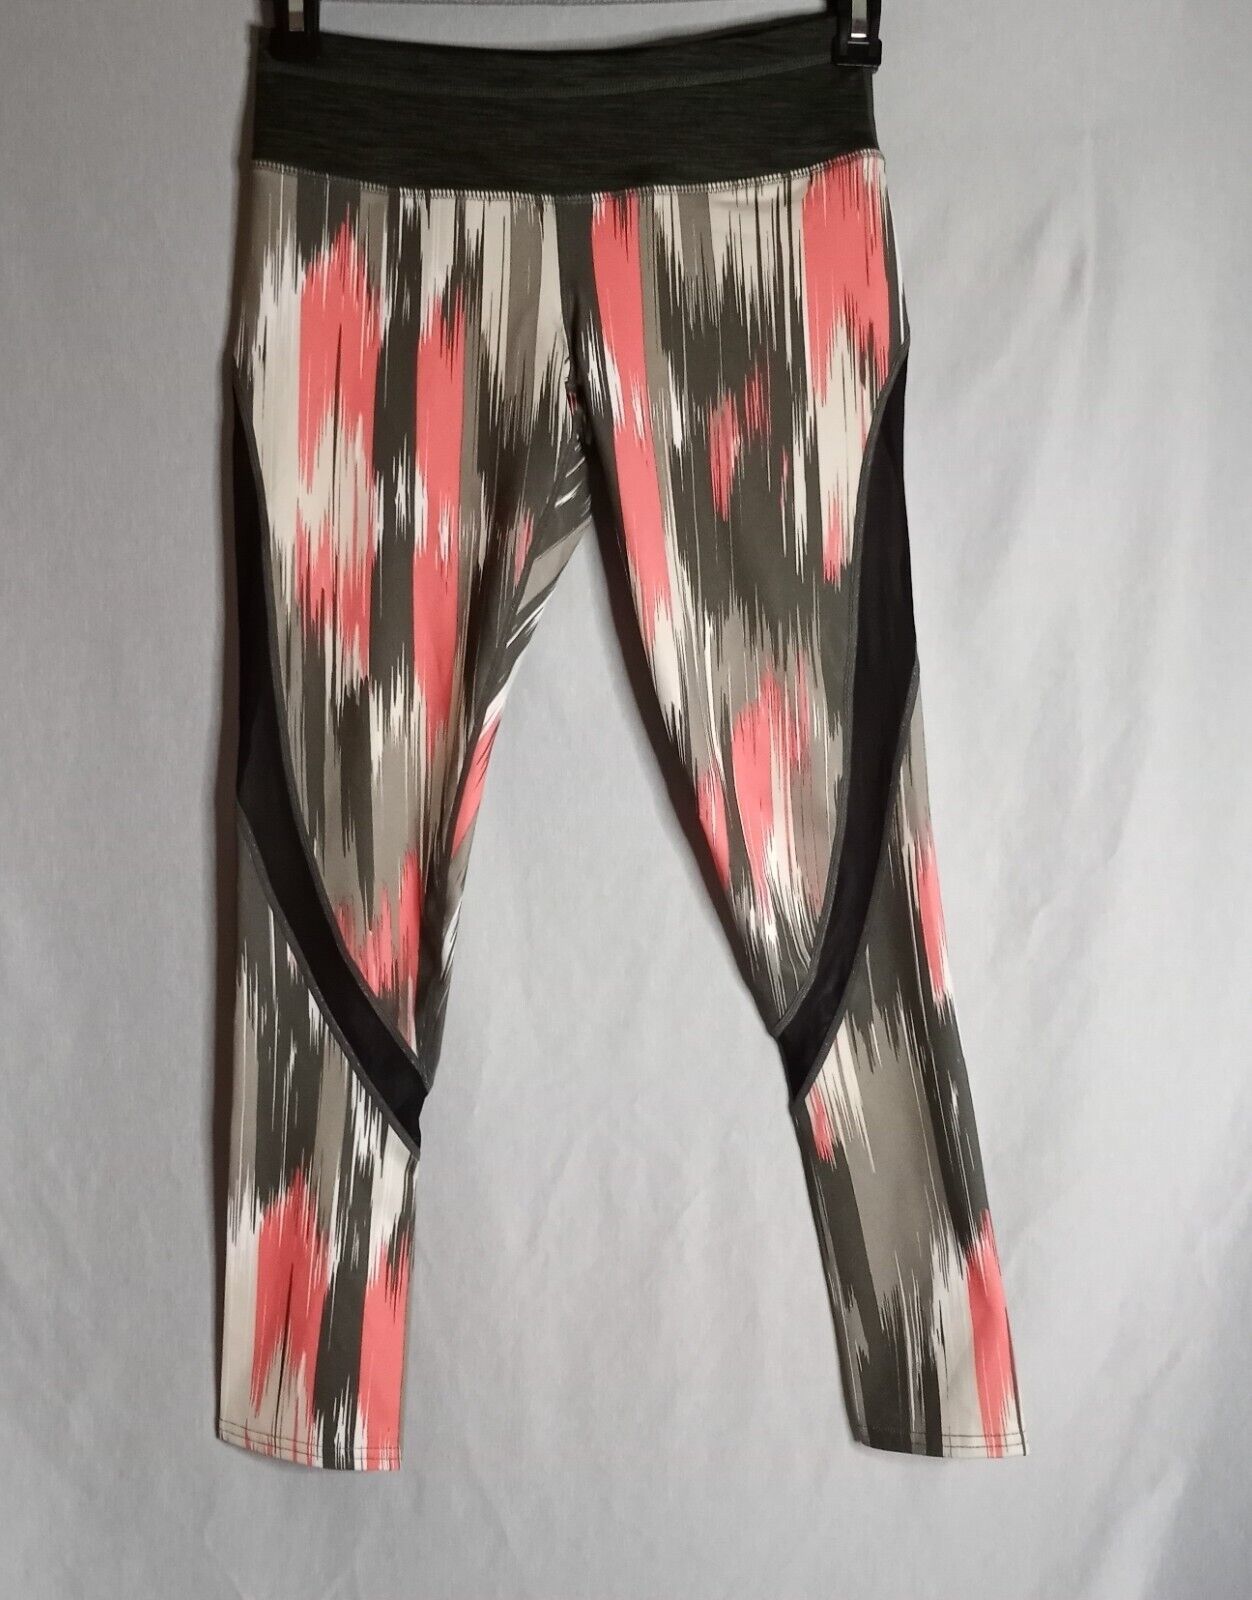 Primary image for Skechers Performance Women's Aztec Athletic Yoga Gym Workout Leggings Size S